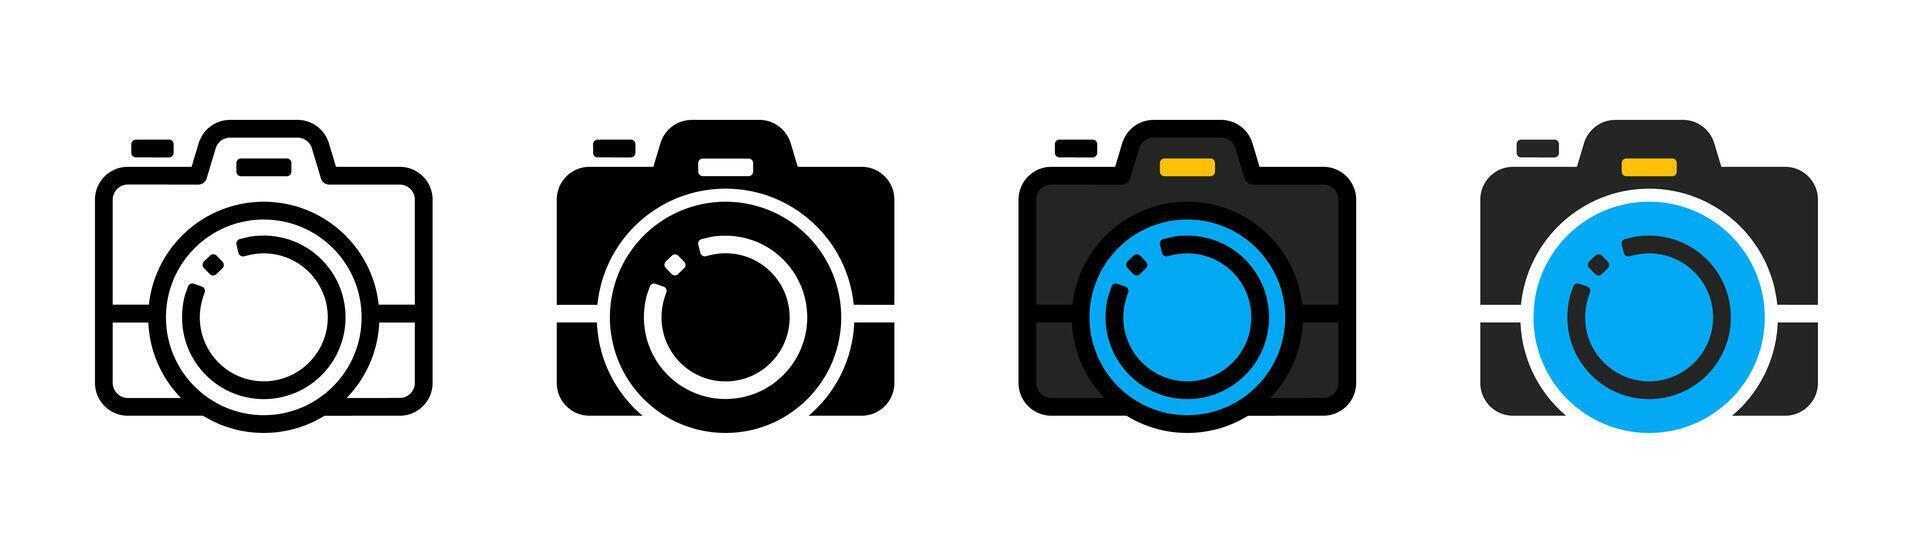 Camera vector icon in modern style isolated on white background. camera concept icon for web and mobile design.